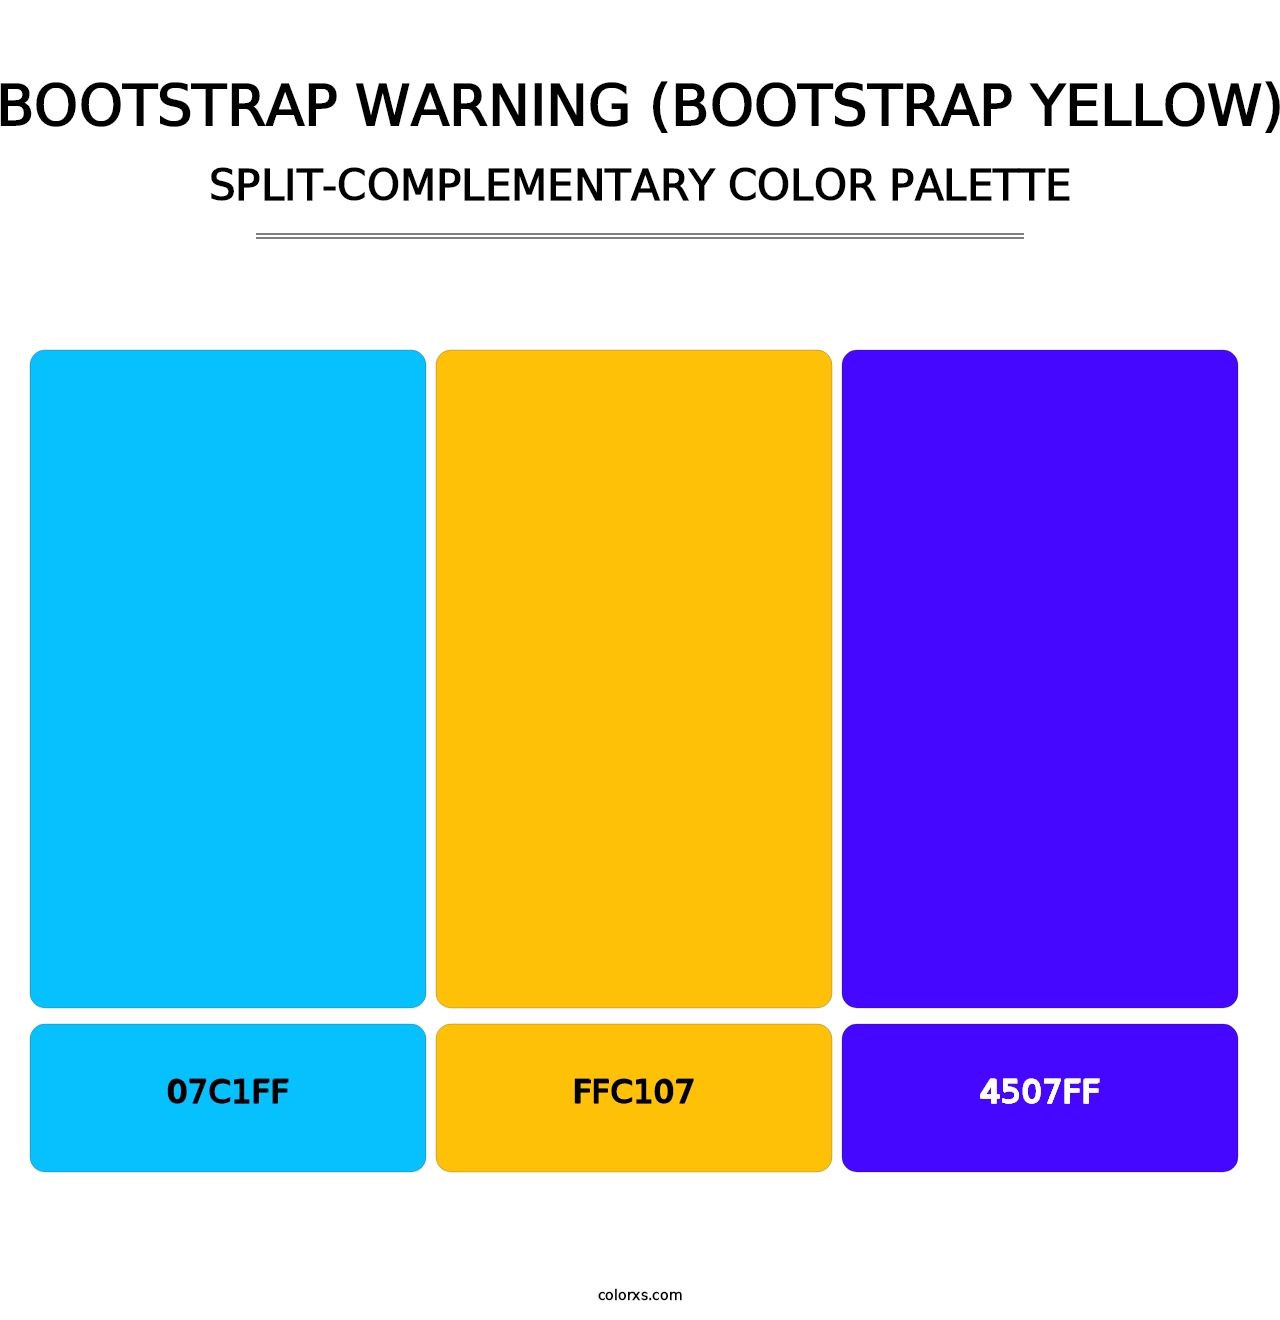 Bootstrap Warning (Bootstrap Yellow) - Split-Complementary Color Palette